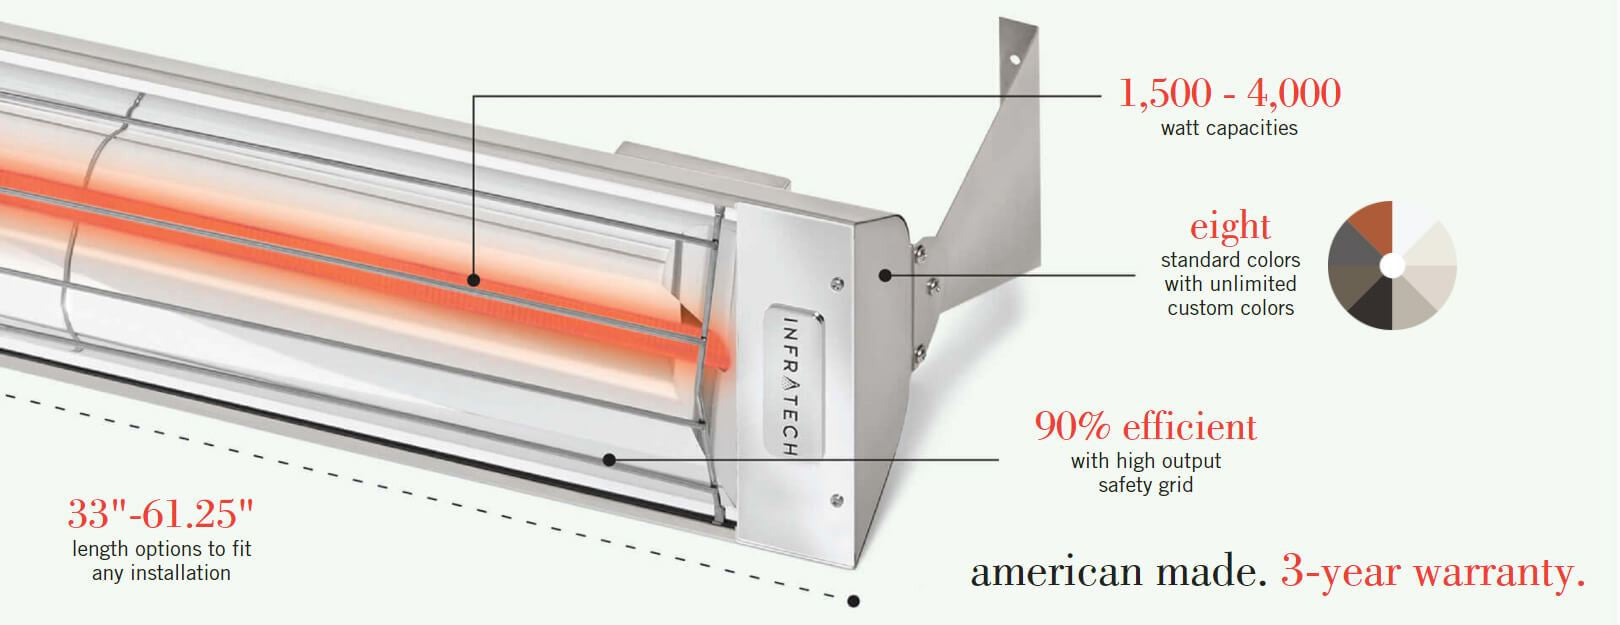 Infratech W Series Electric Heater Infratech Product Specifications